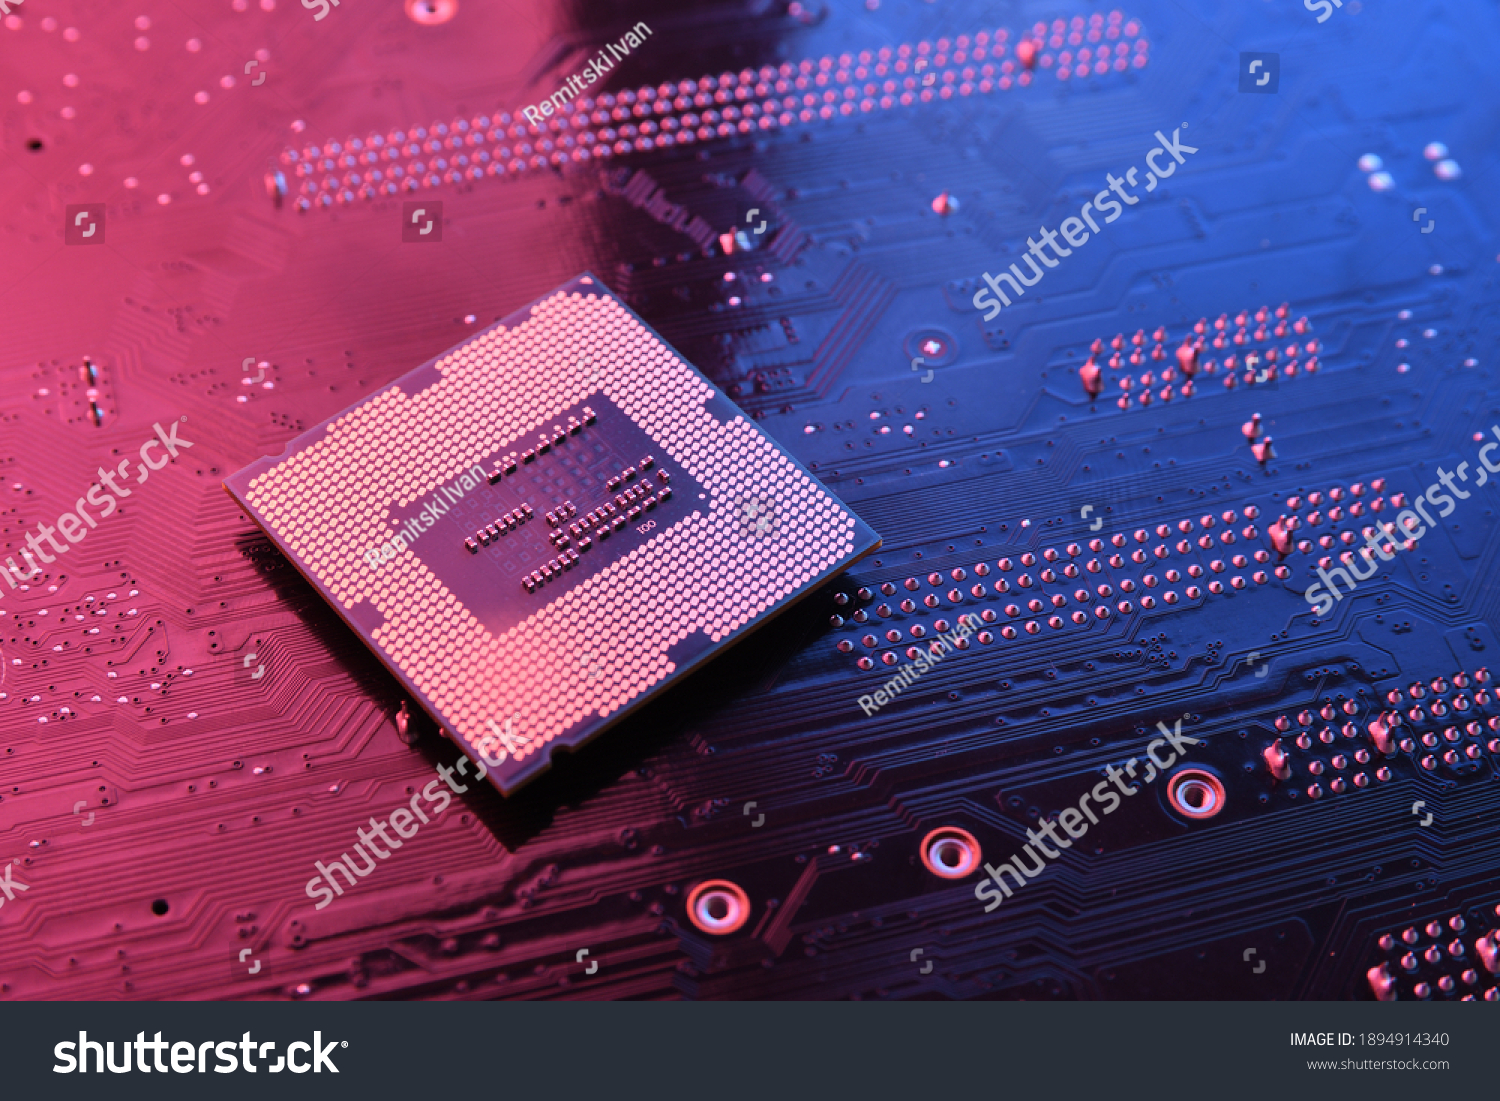 Computer cpu processor chip on circuit board ,motherboard background. Close-up. With red-blue lighting. #1894914340